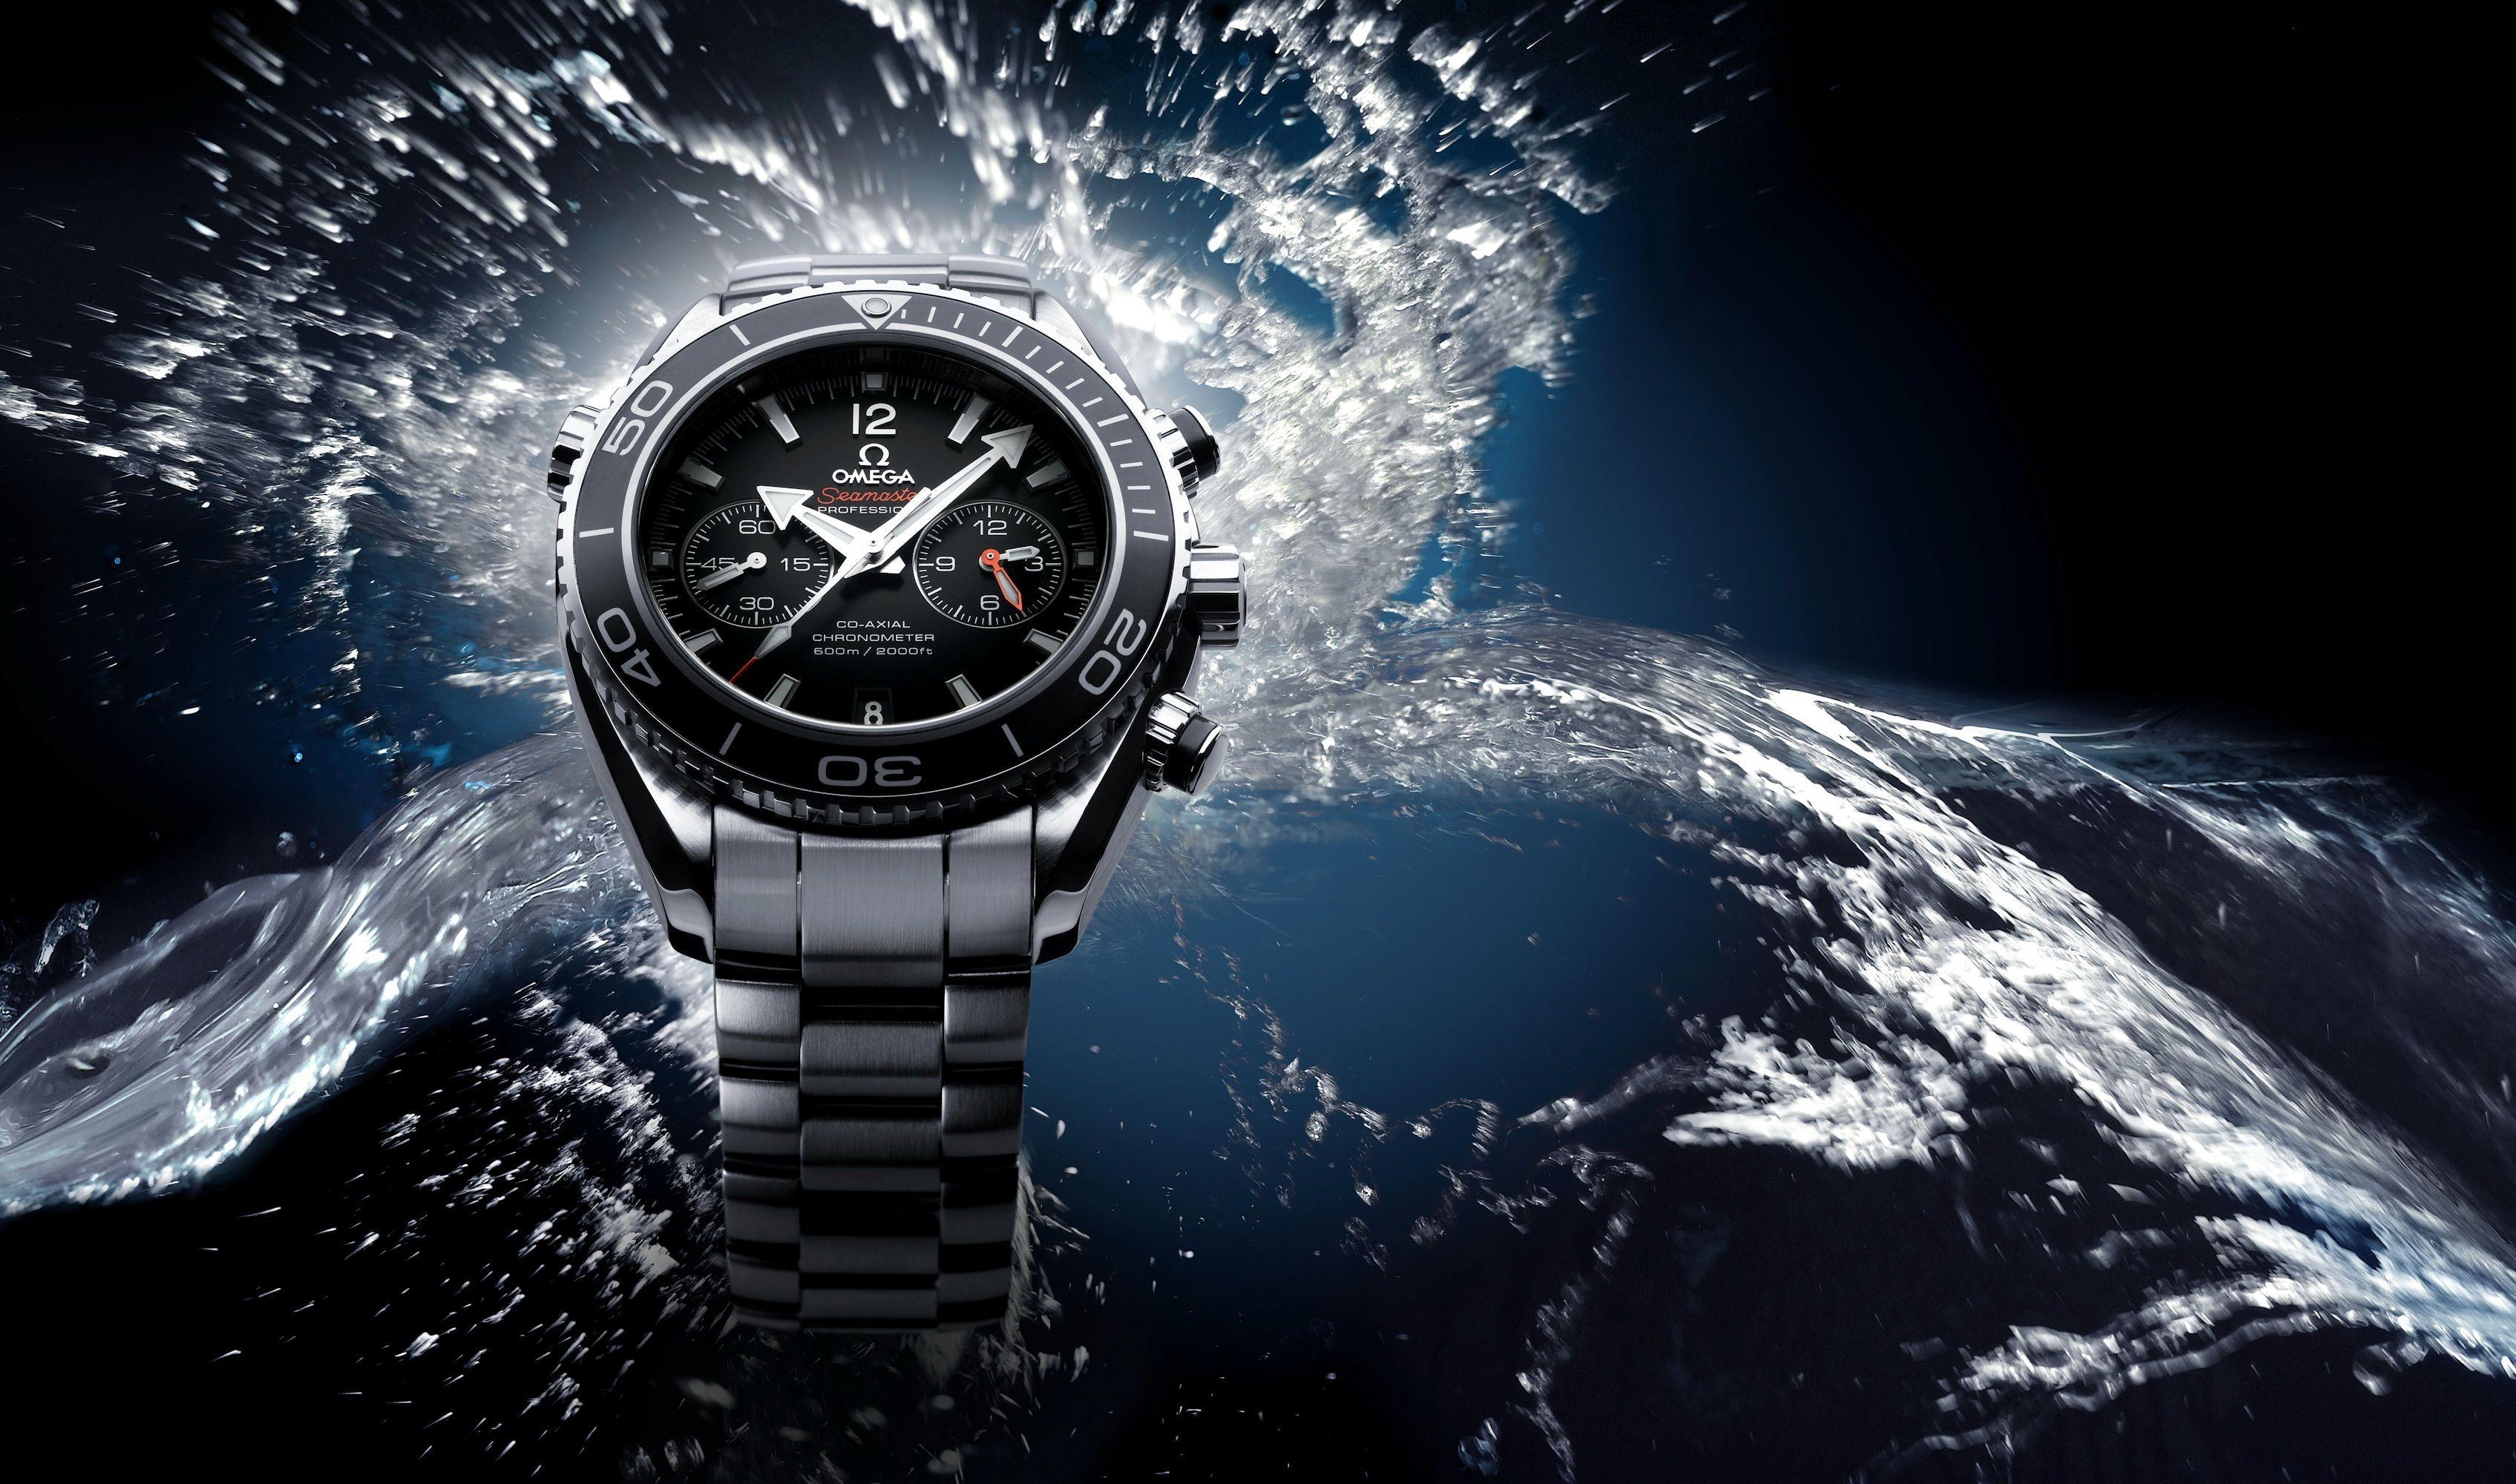 Omega Watch Wallpaper Free Omega Watch Background